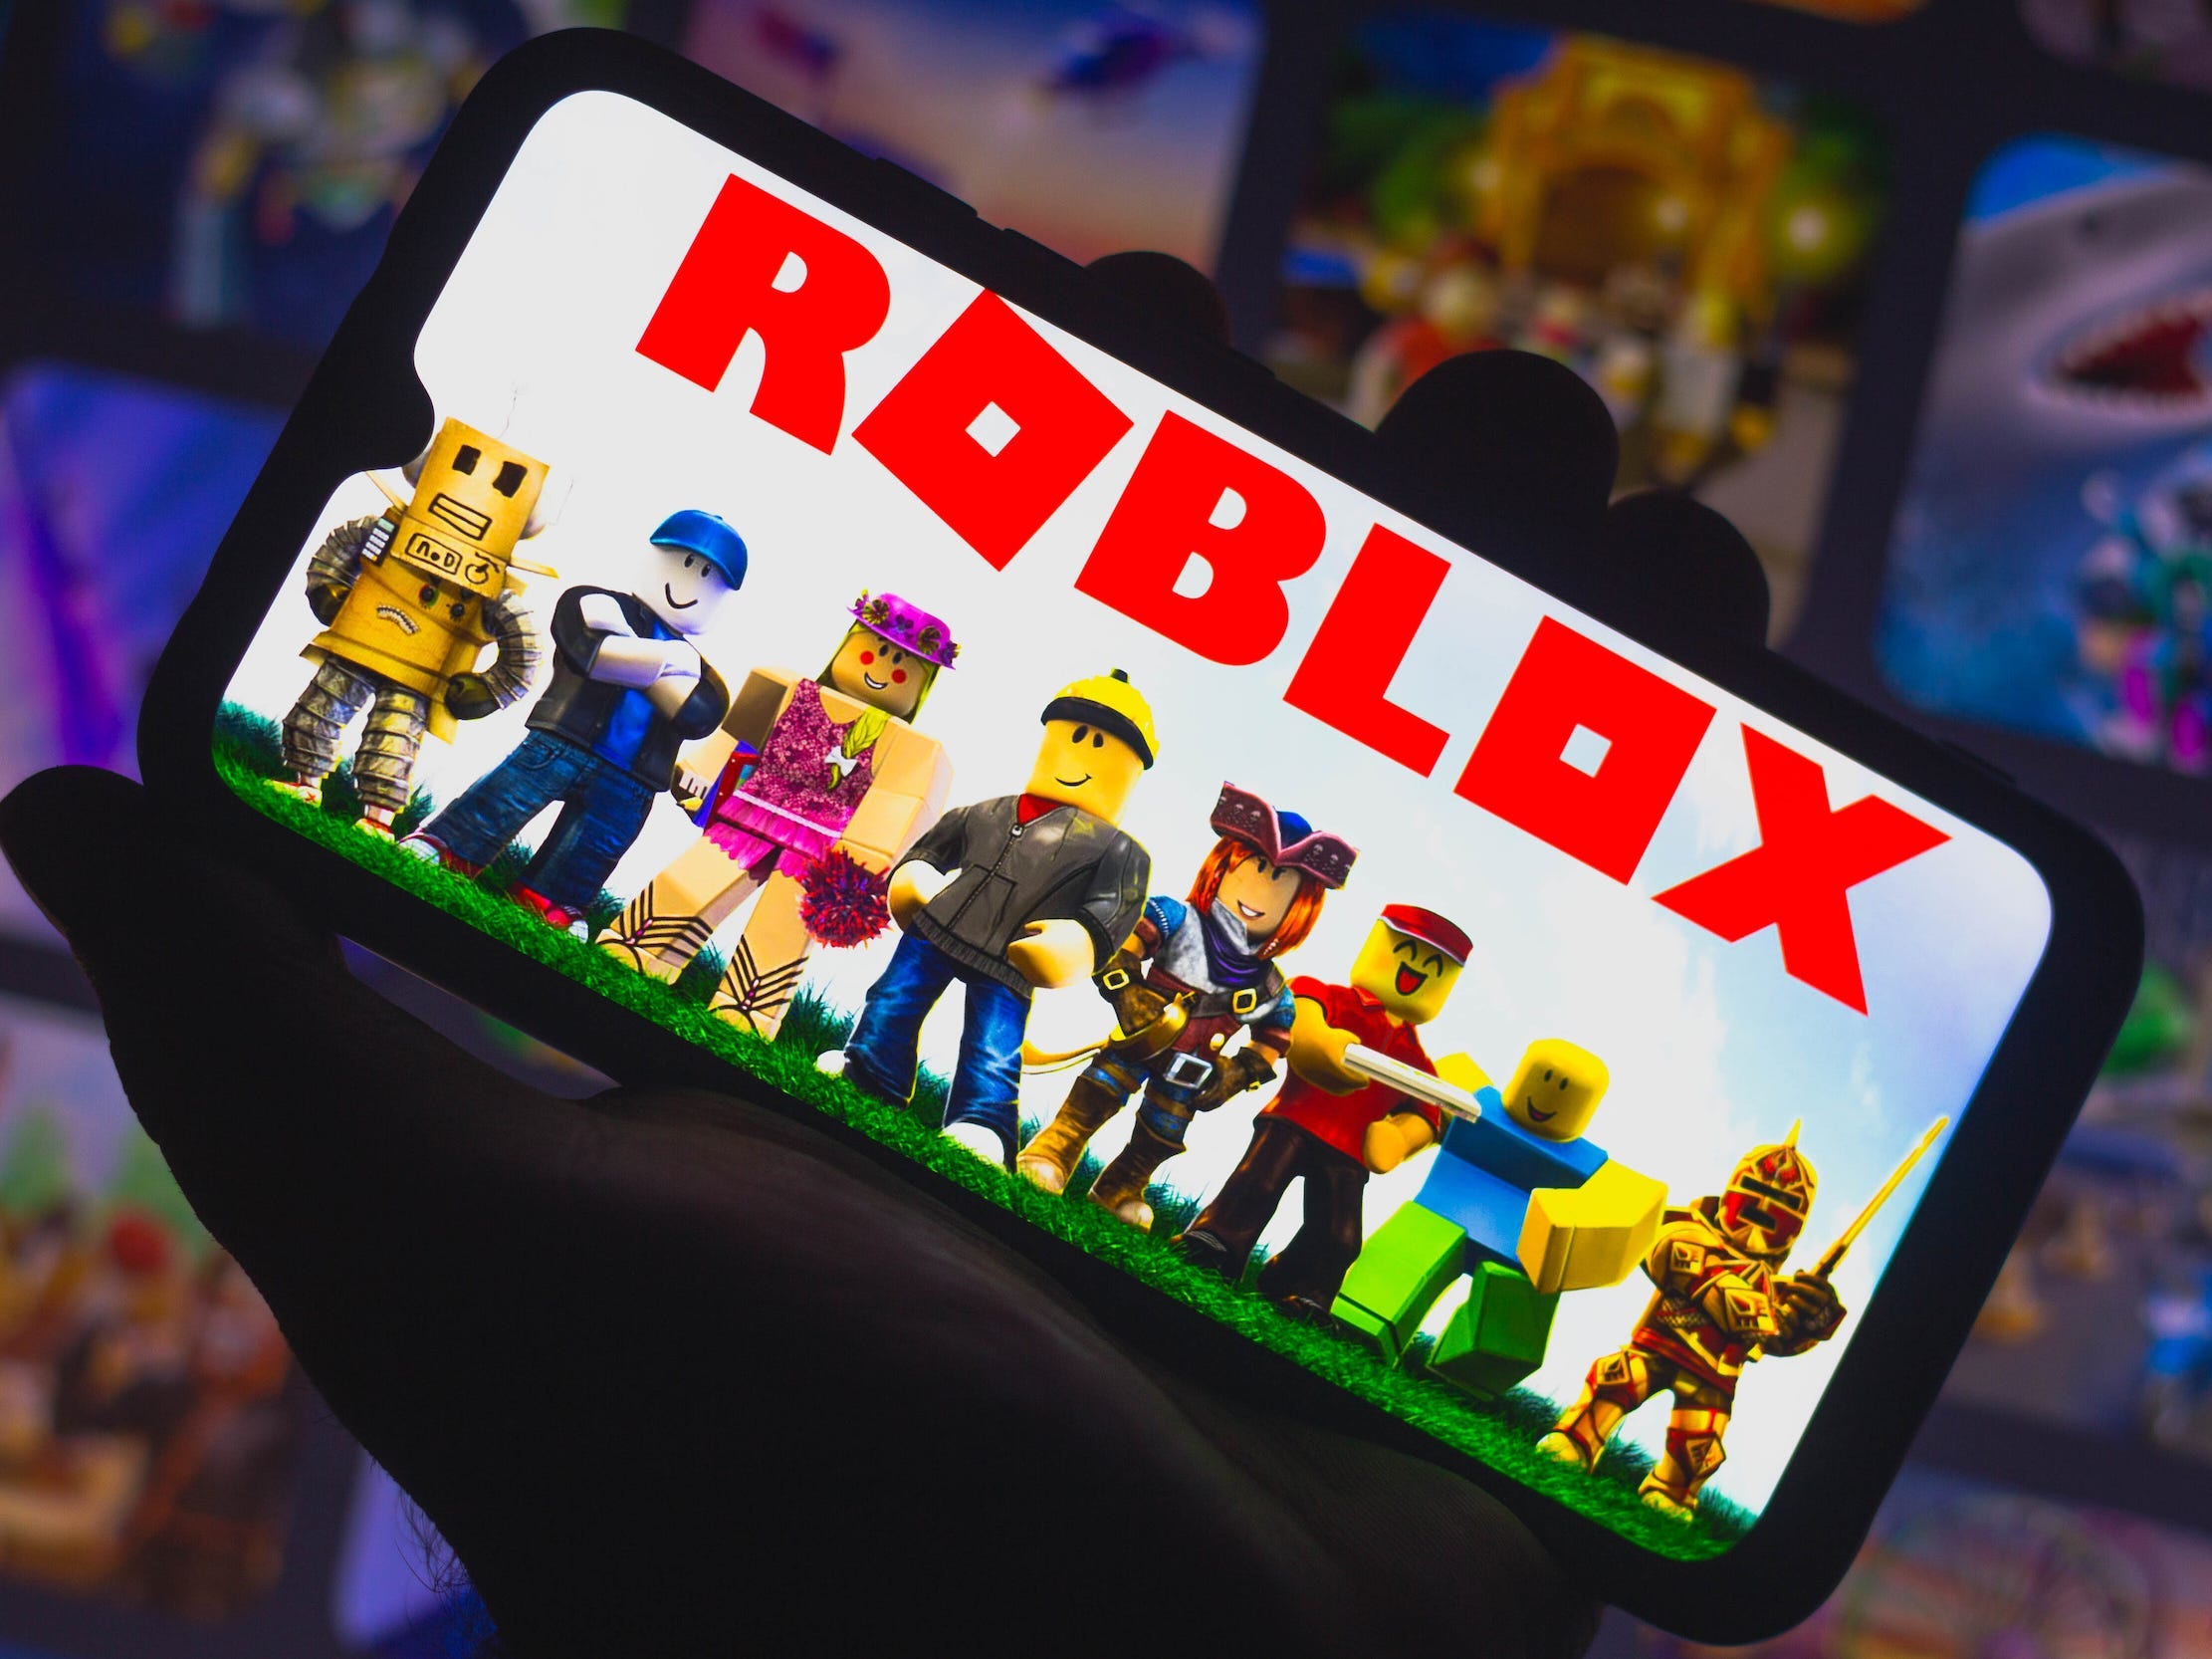 A lawsuit alleges Roblox scammed kids by selling in-game items